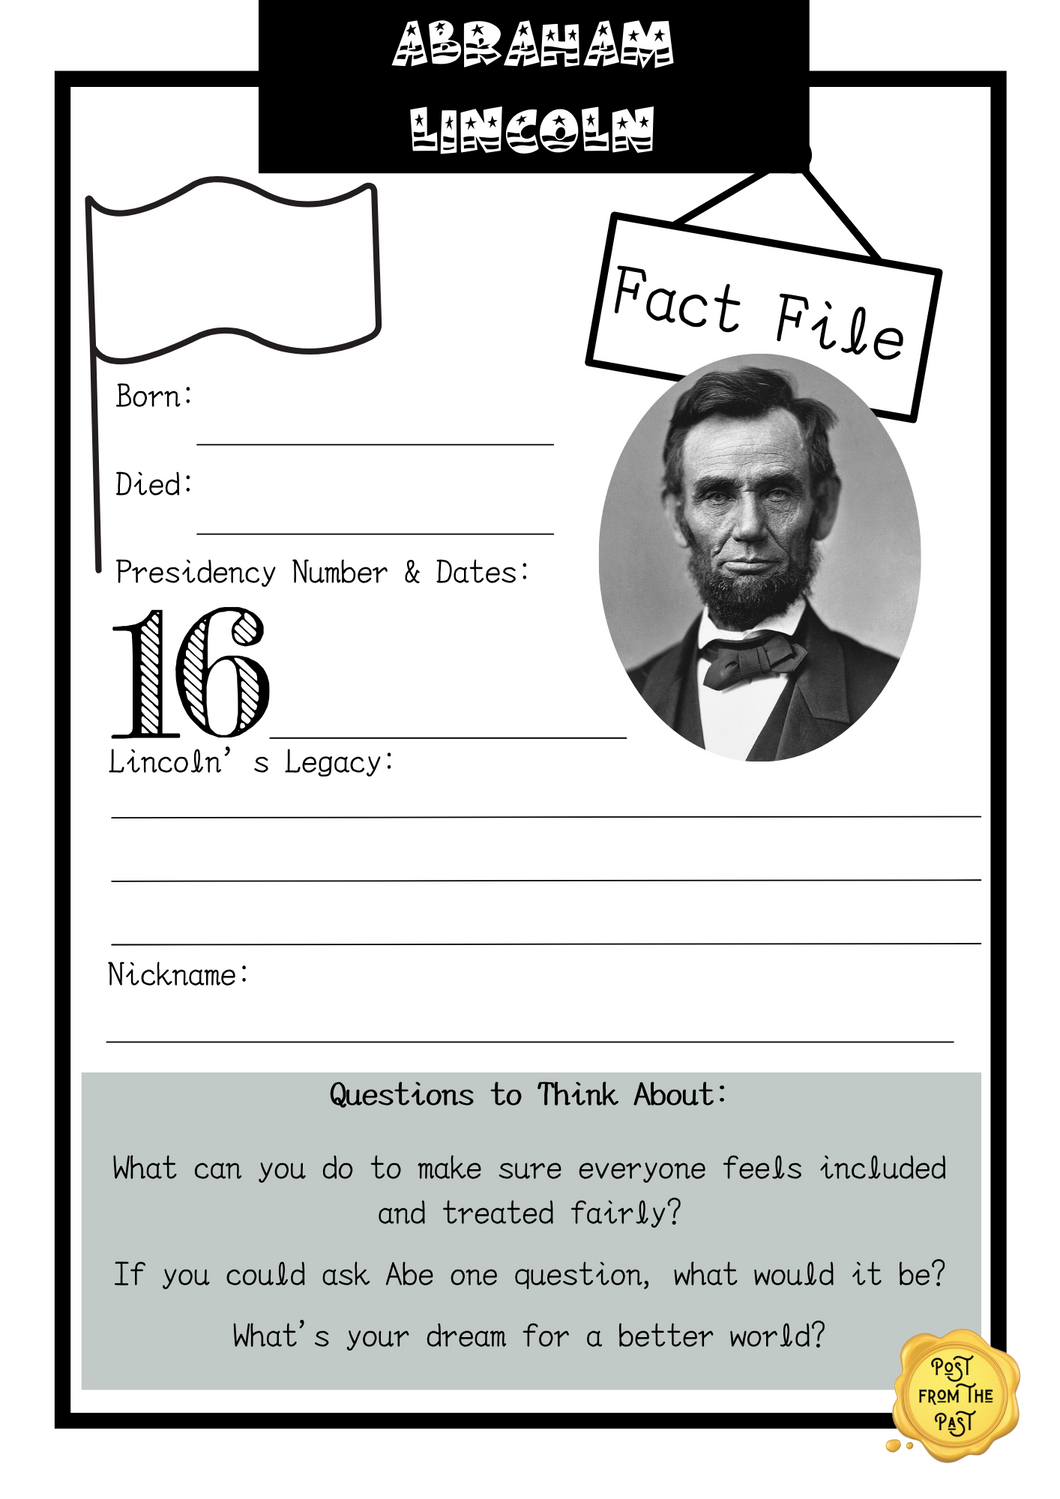 Abraham Lincoln Fact File